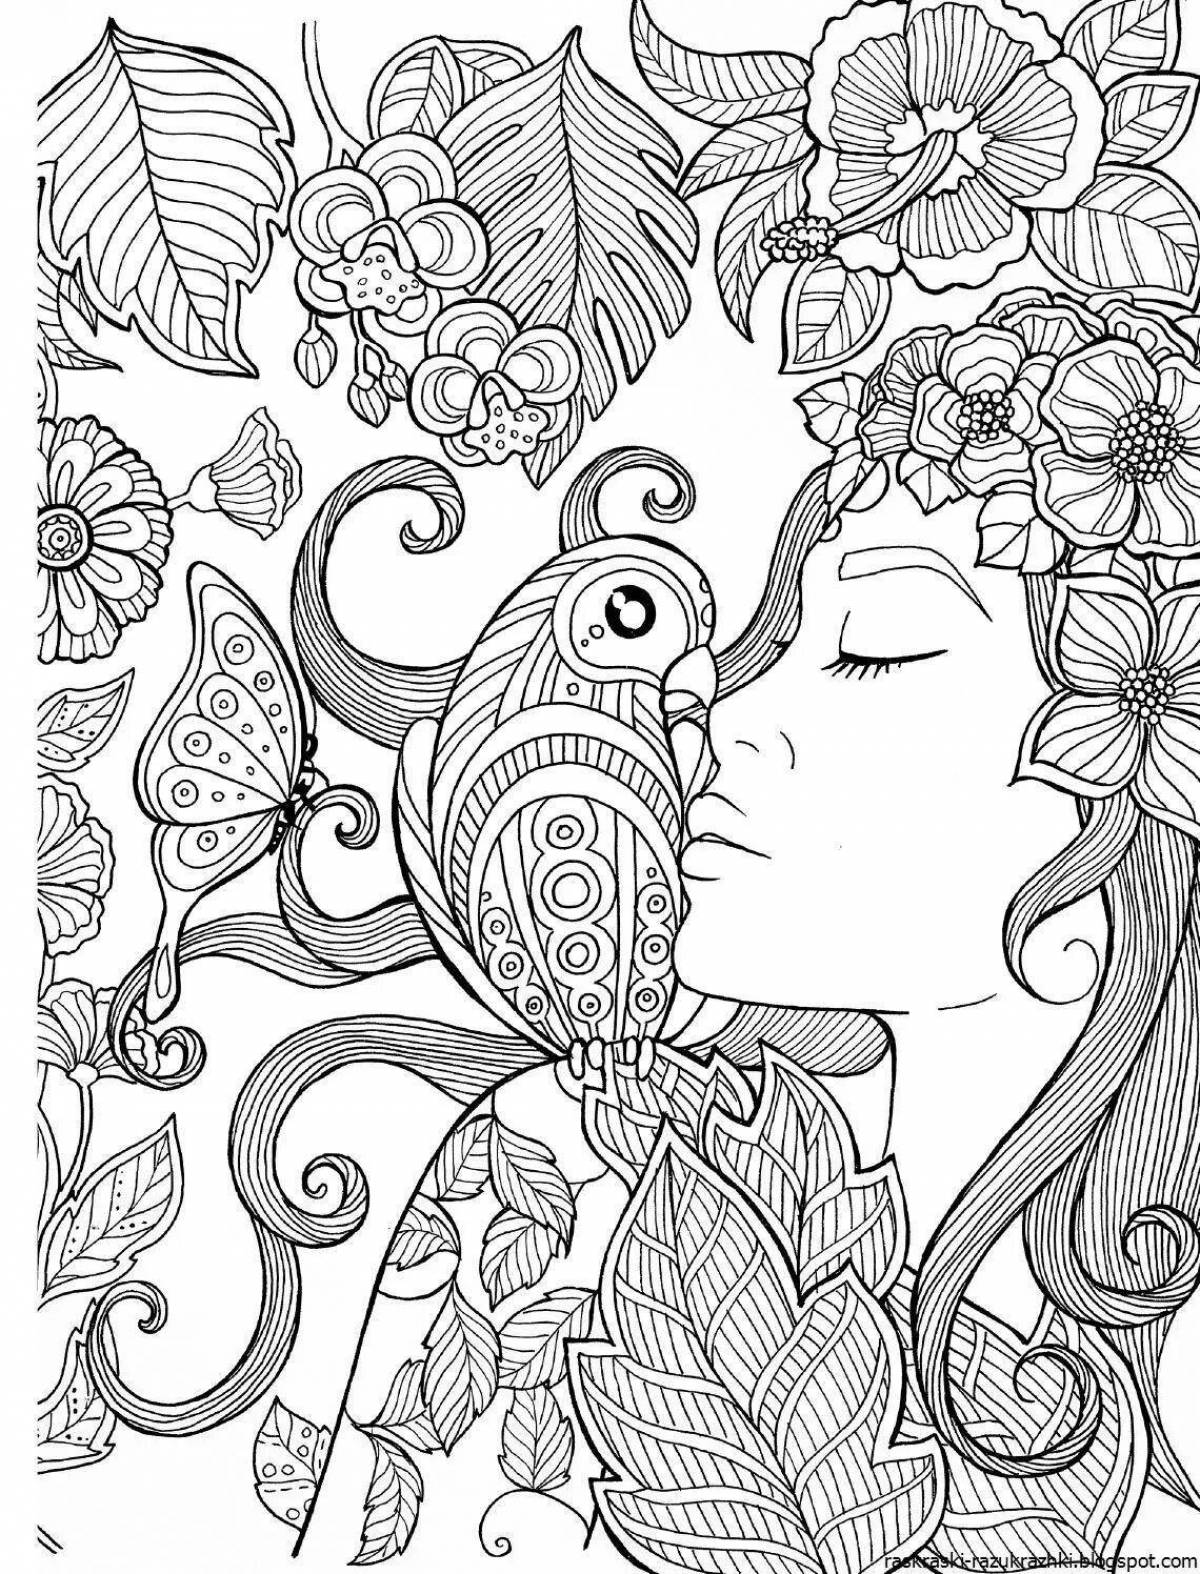 Refreshing anti-stress coloring book for adults